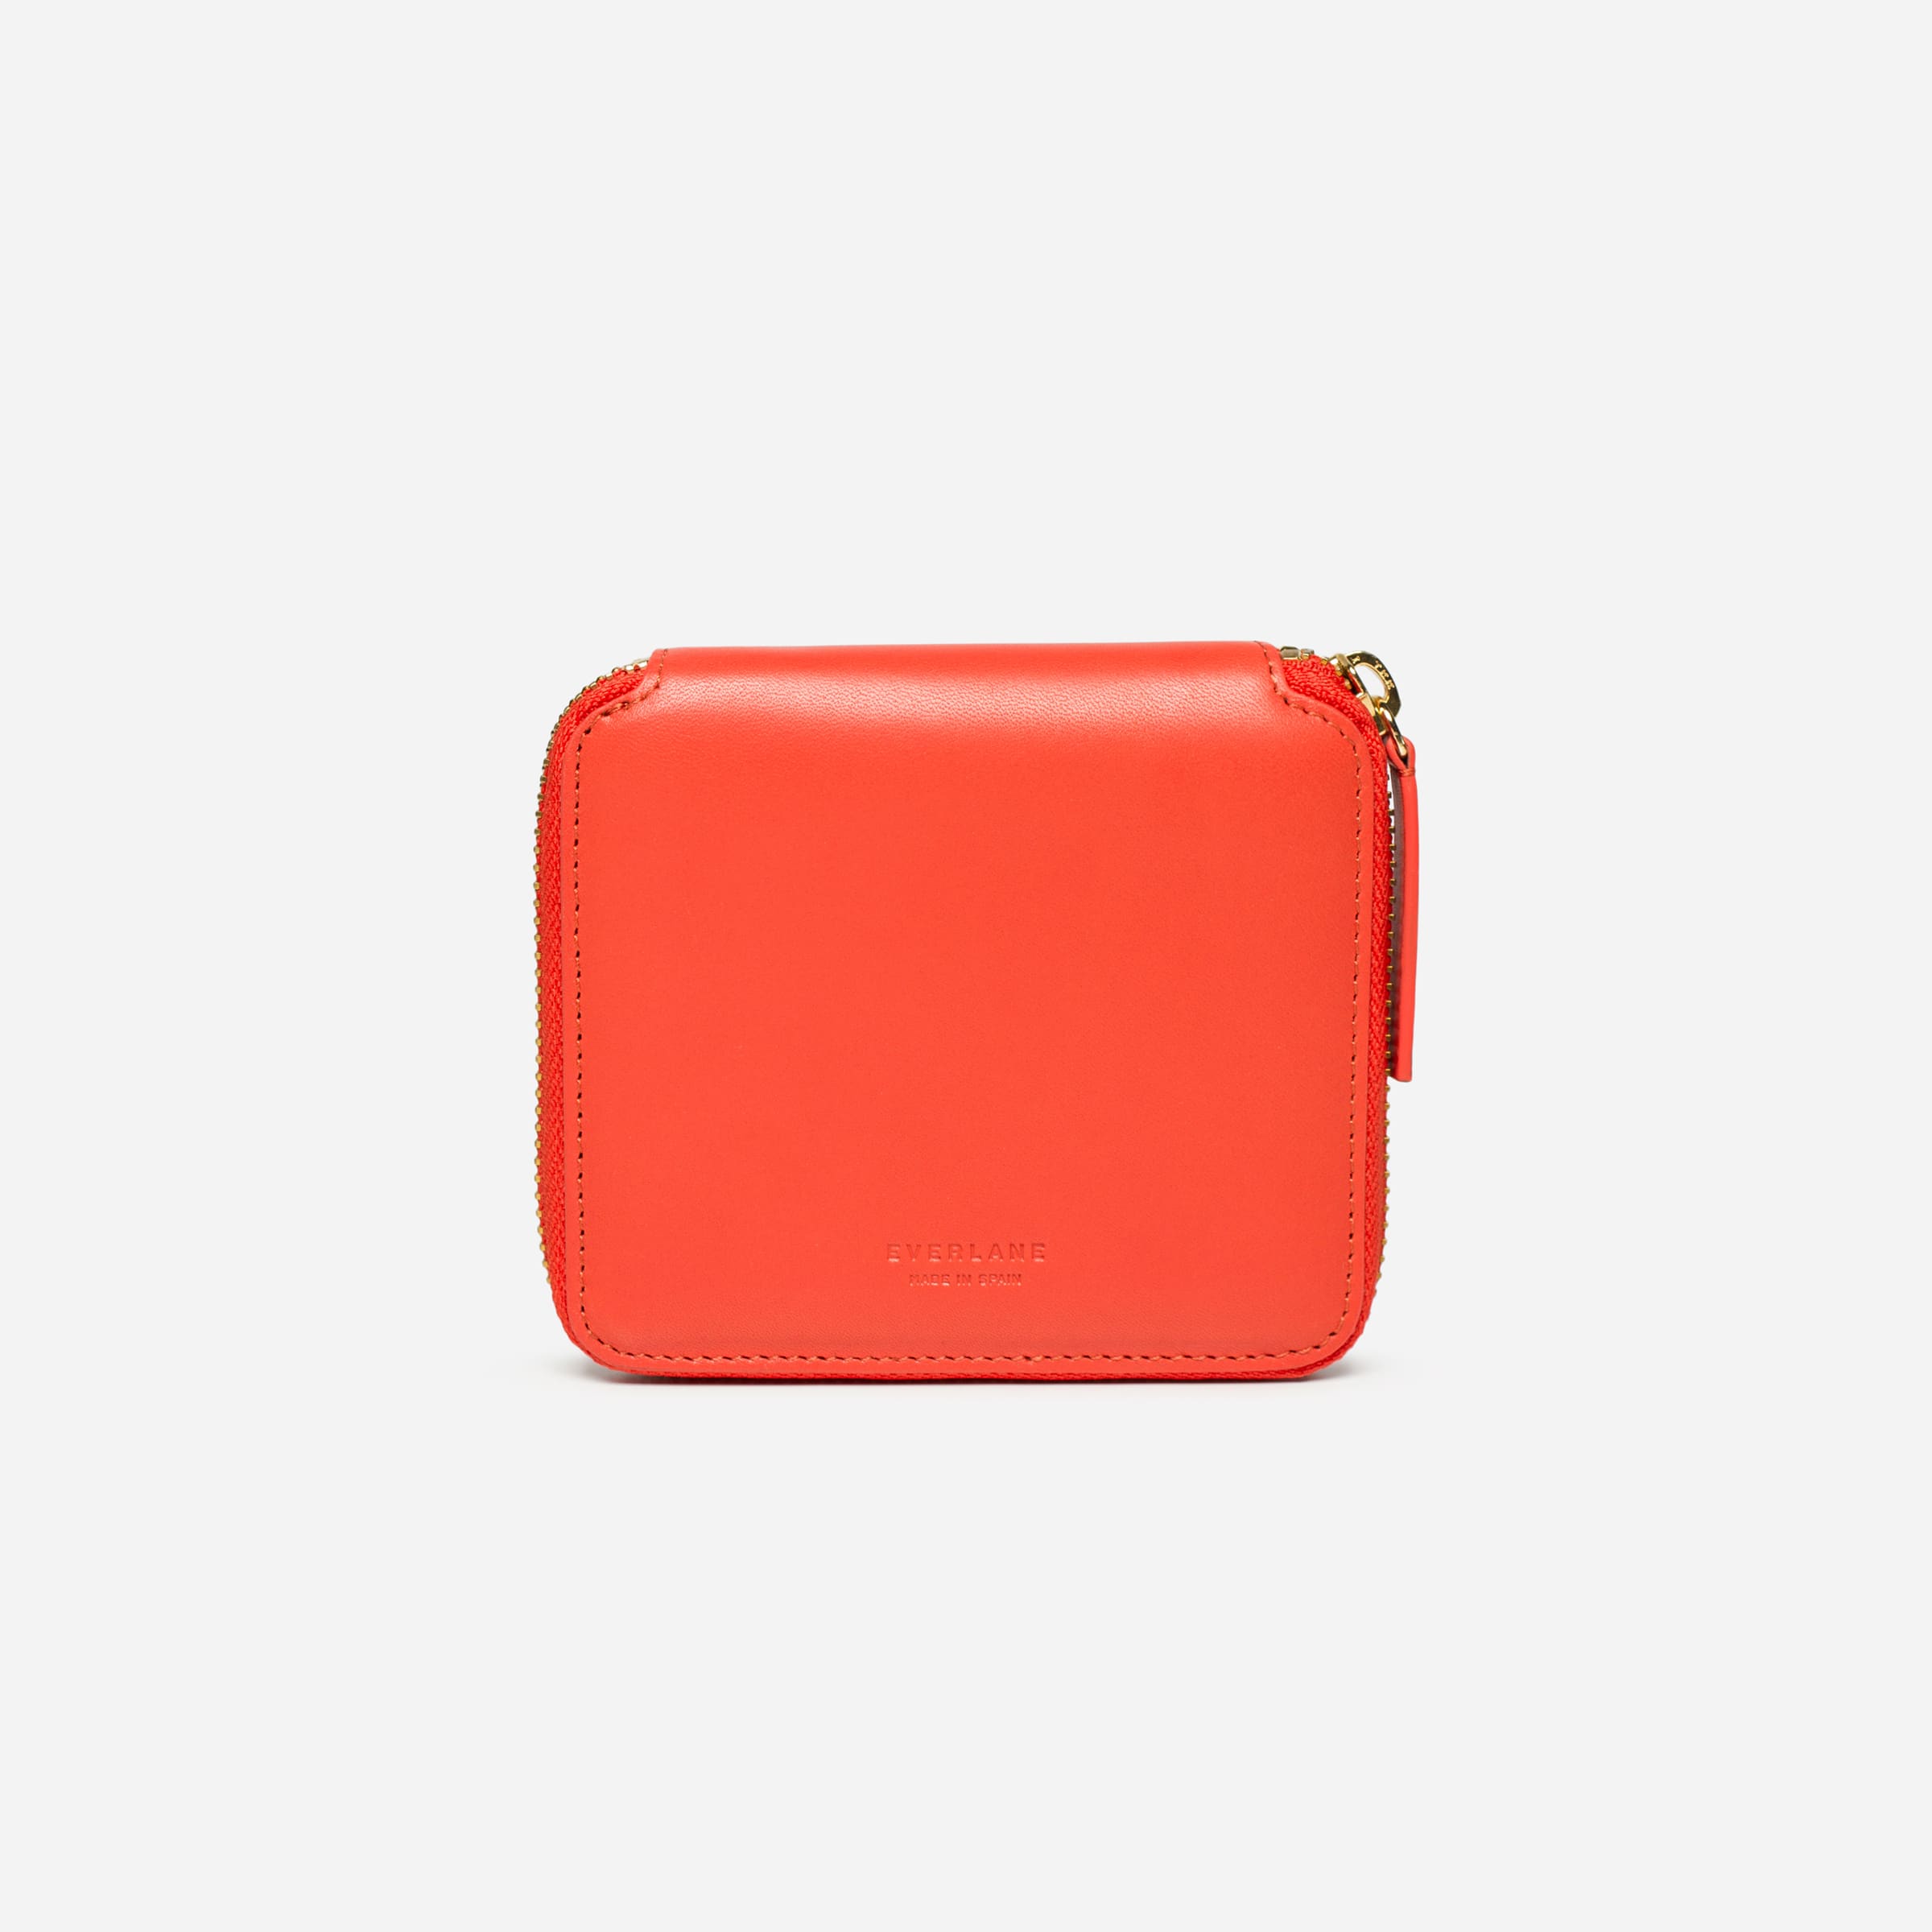 The Square Zip Wallet